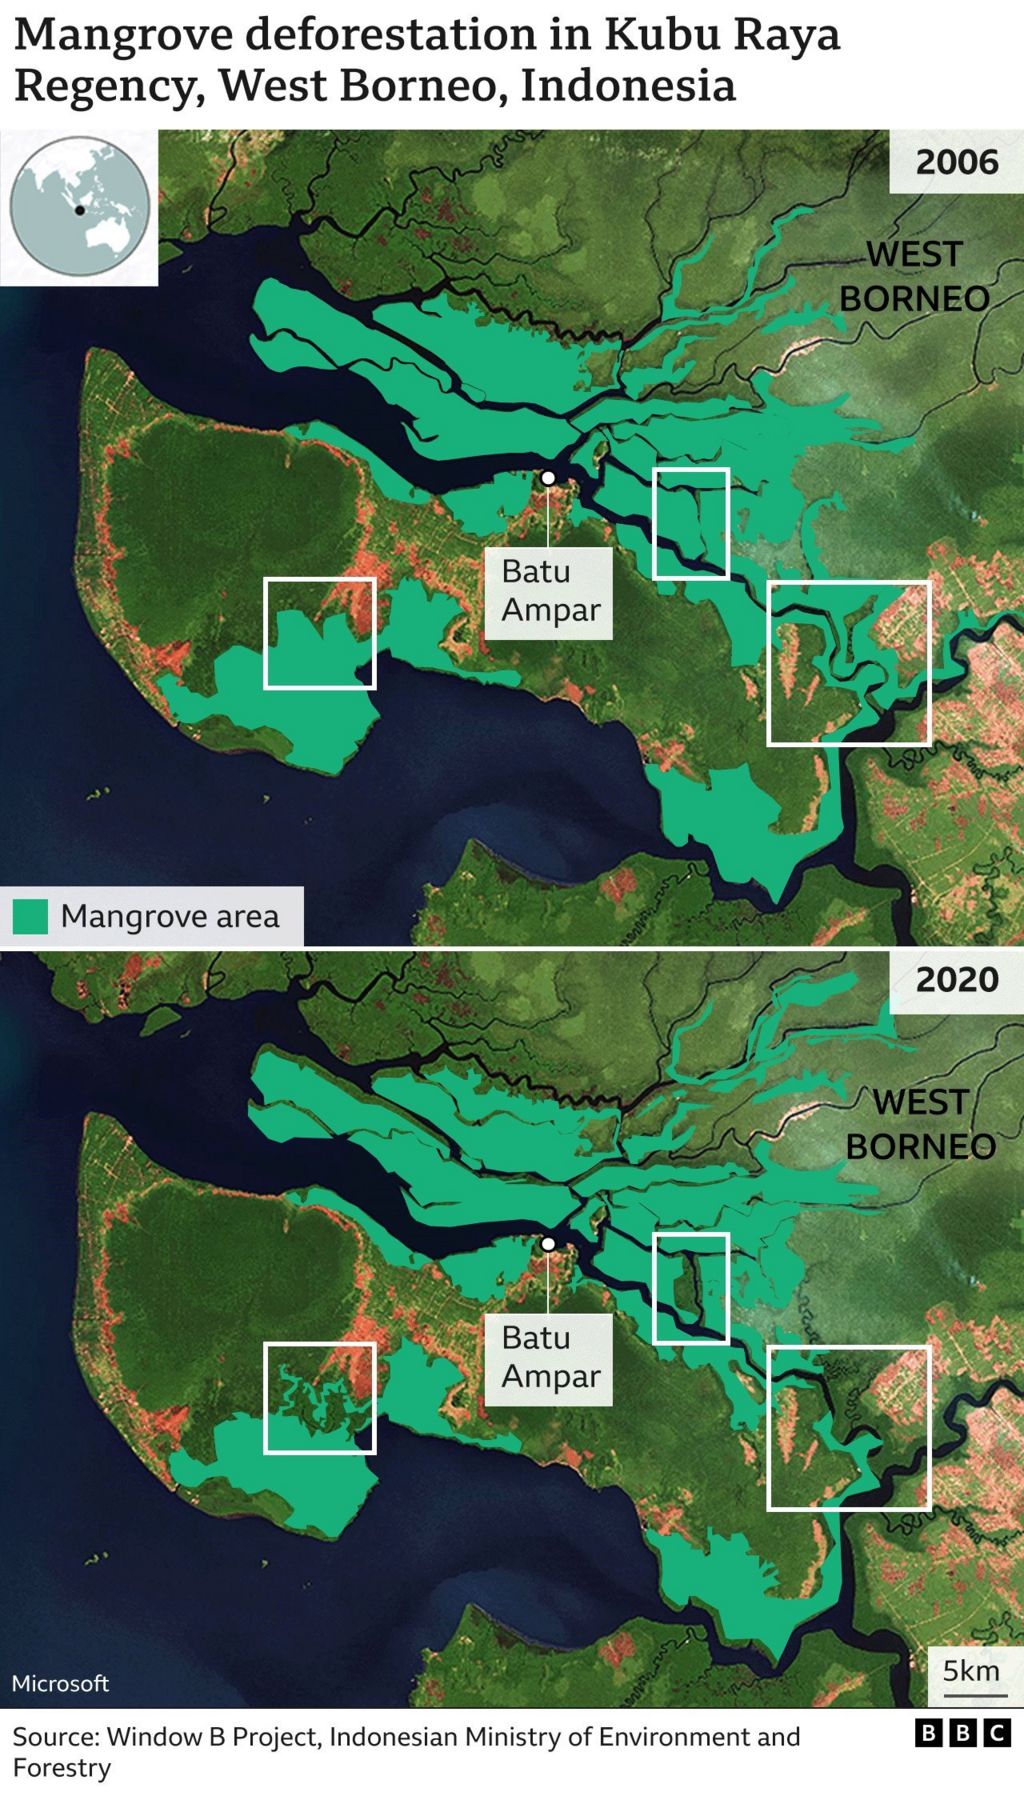 BBC graphic showing deforestation in the region from 2006 to 2020